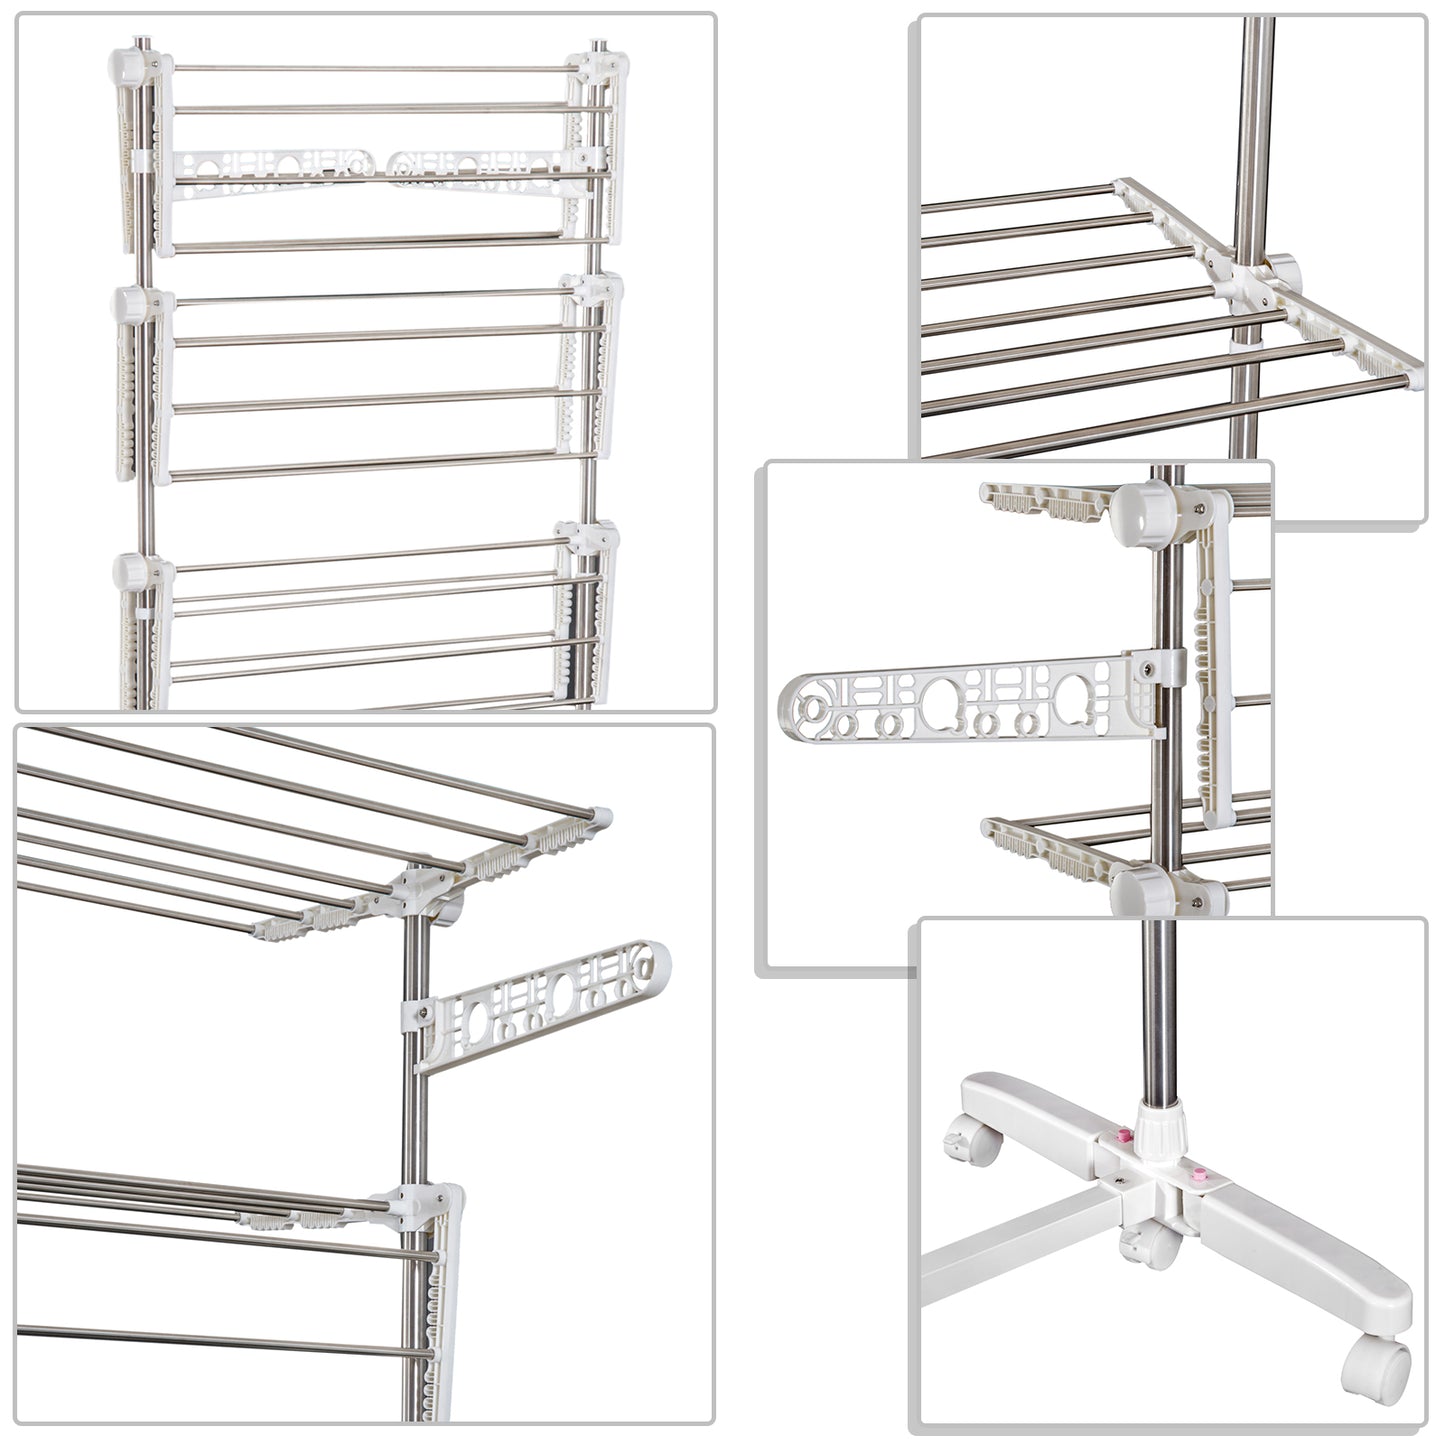 HOMCOM 4 Layers Folding Cloth Hanger Stand-White/Silver